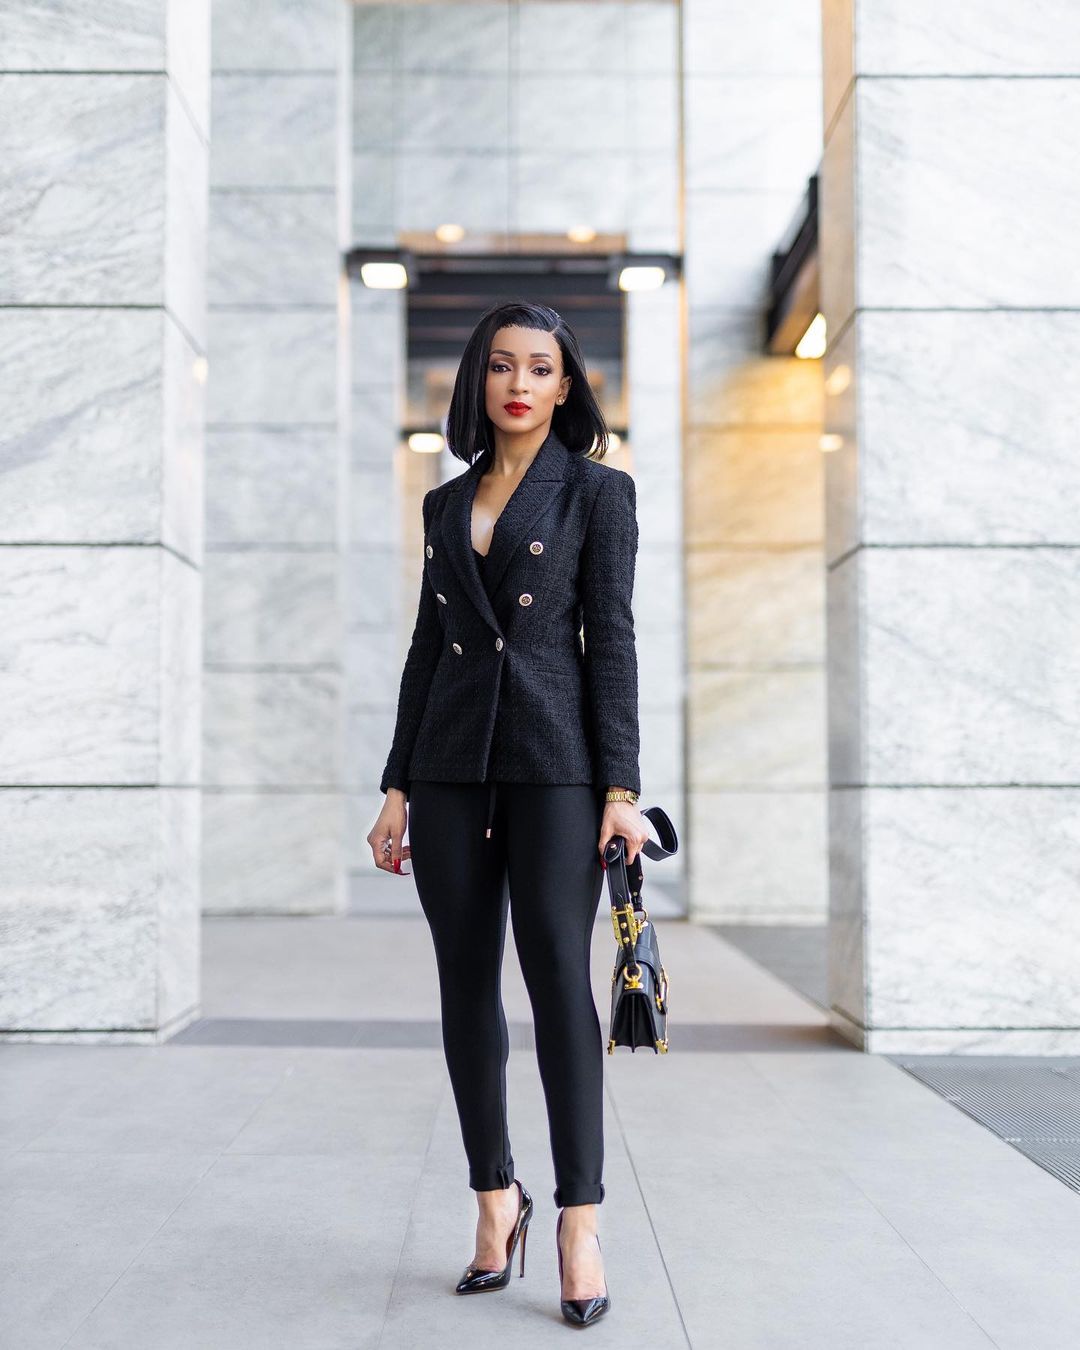 Here's How To End The Year Stylishly To Work